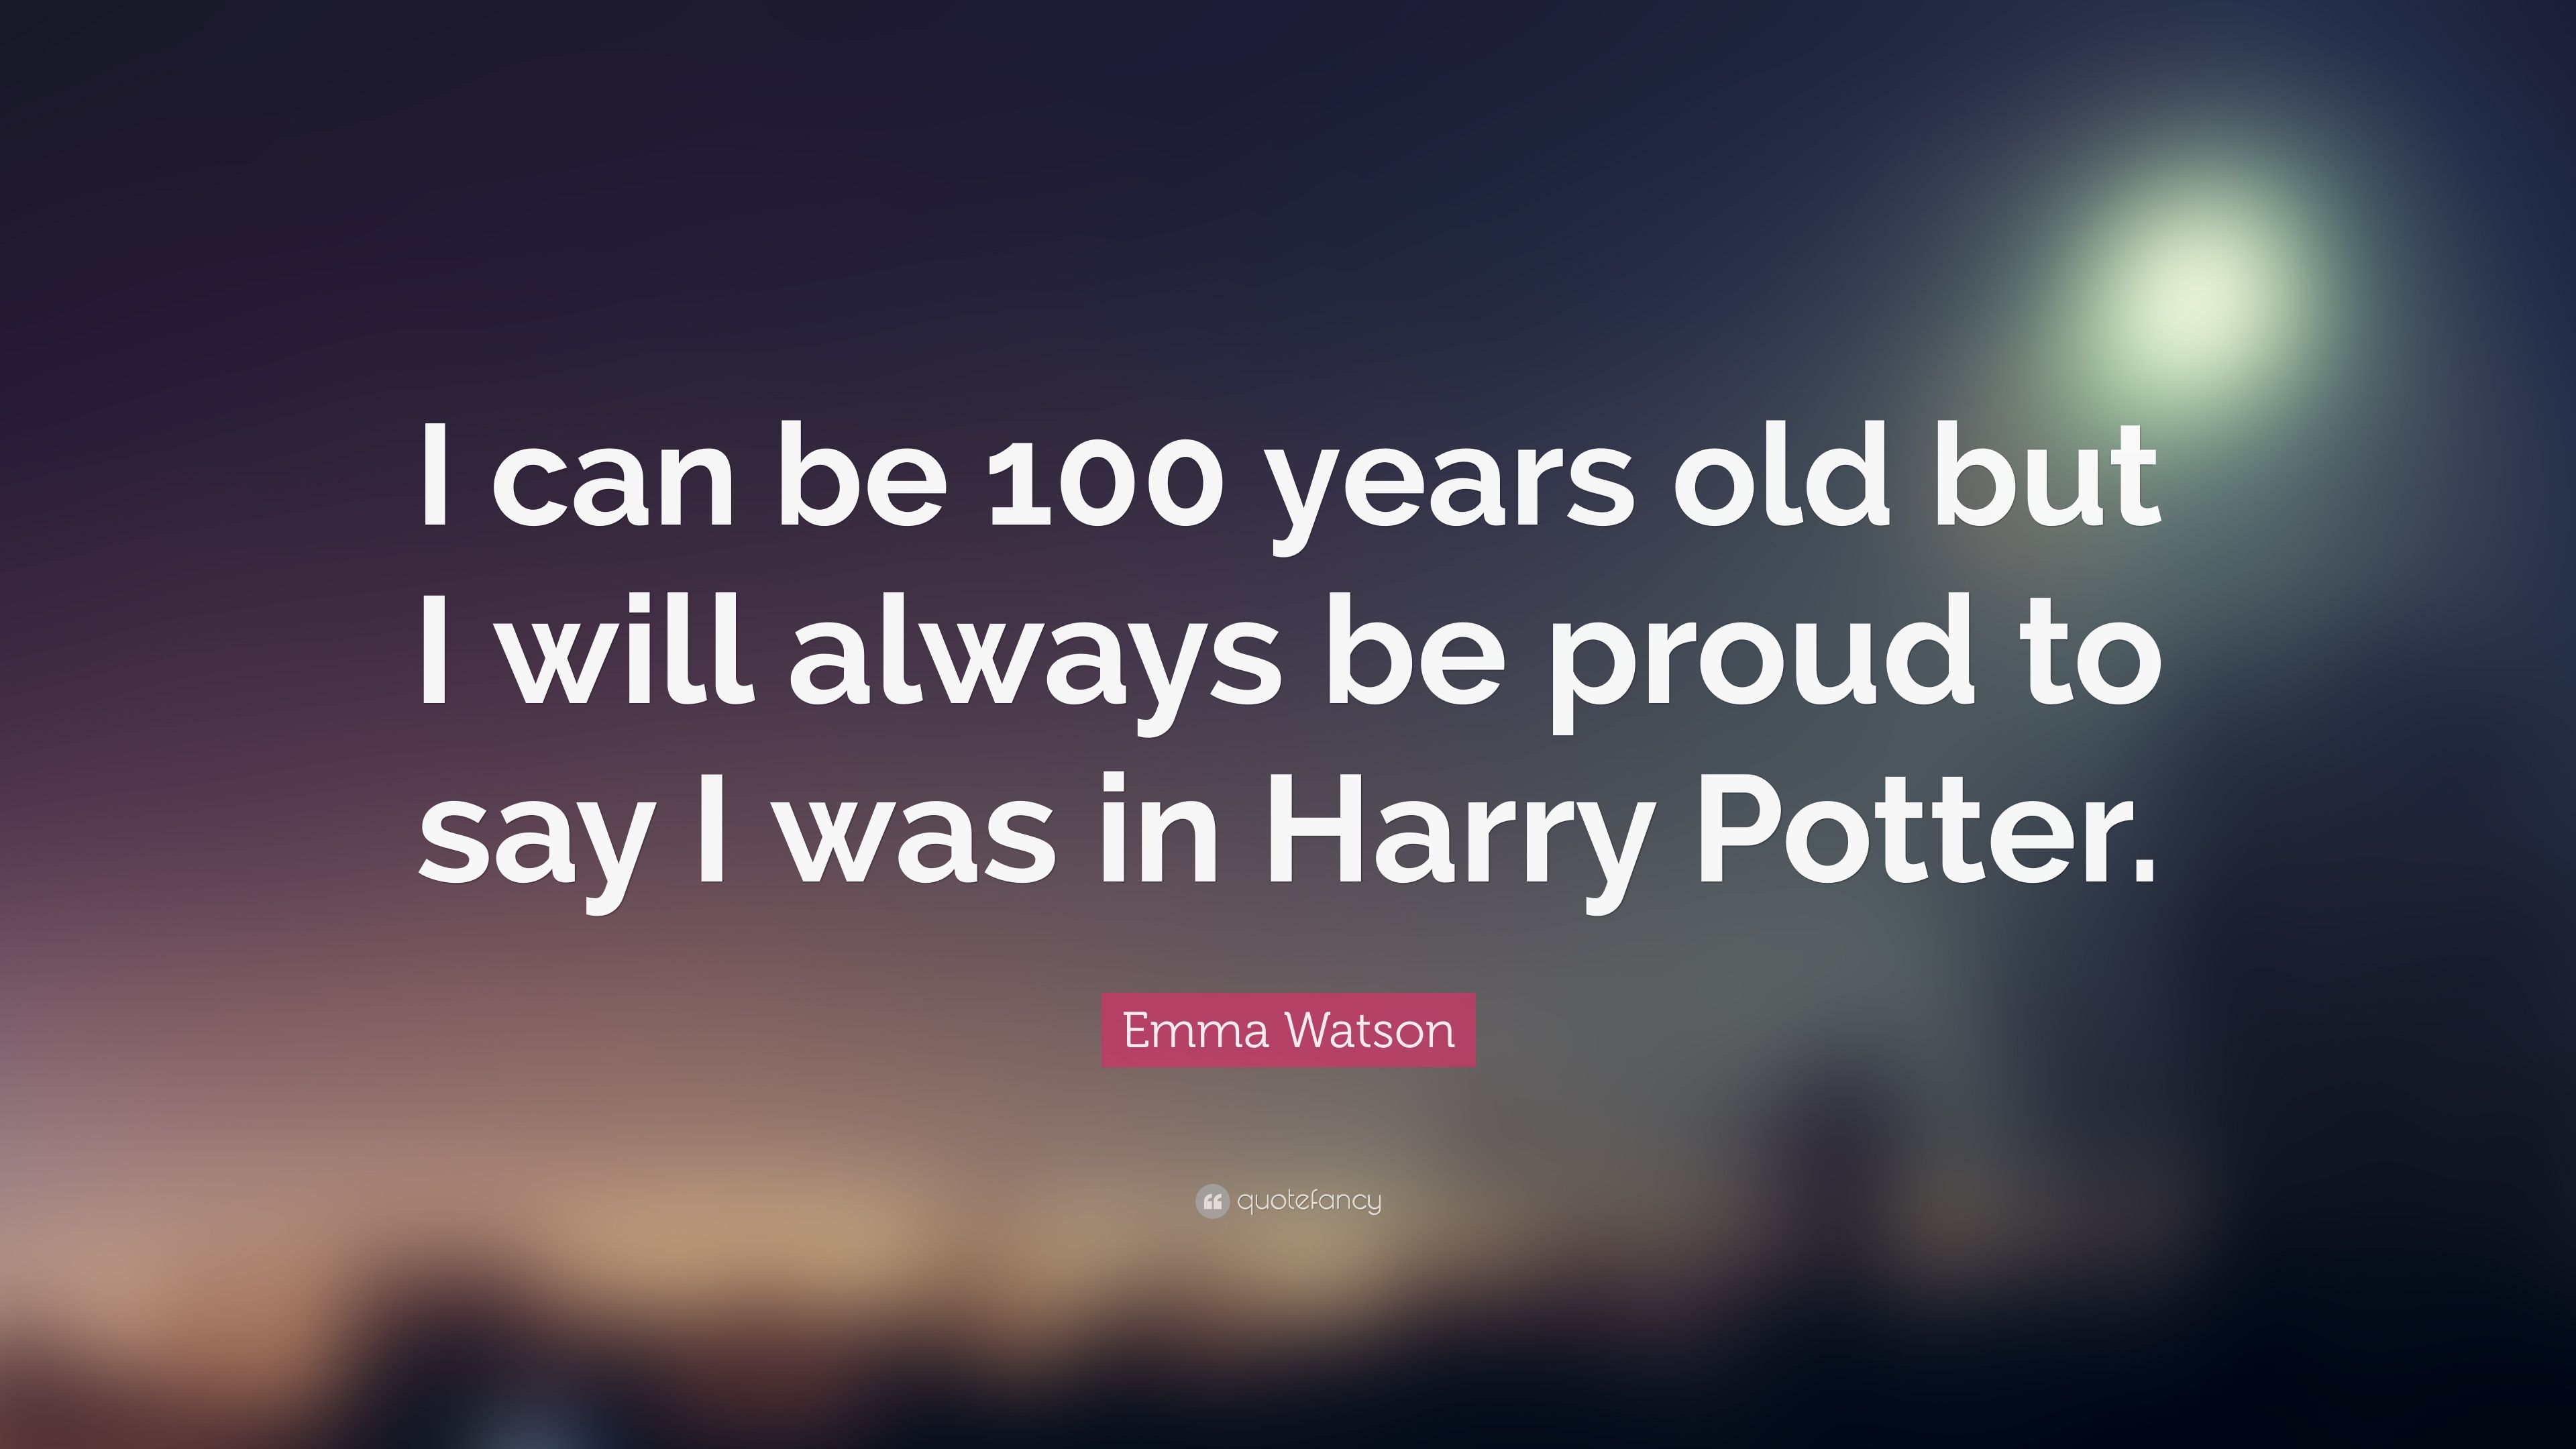 Emma Watson Quote: “I can be 100 years old but I will always be proud to say I was in Harry Potter.” (7 wallpaper)